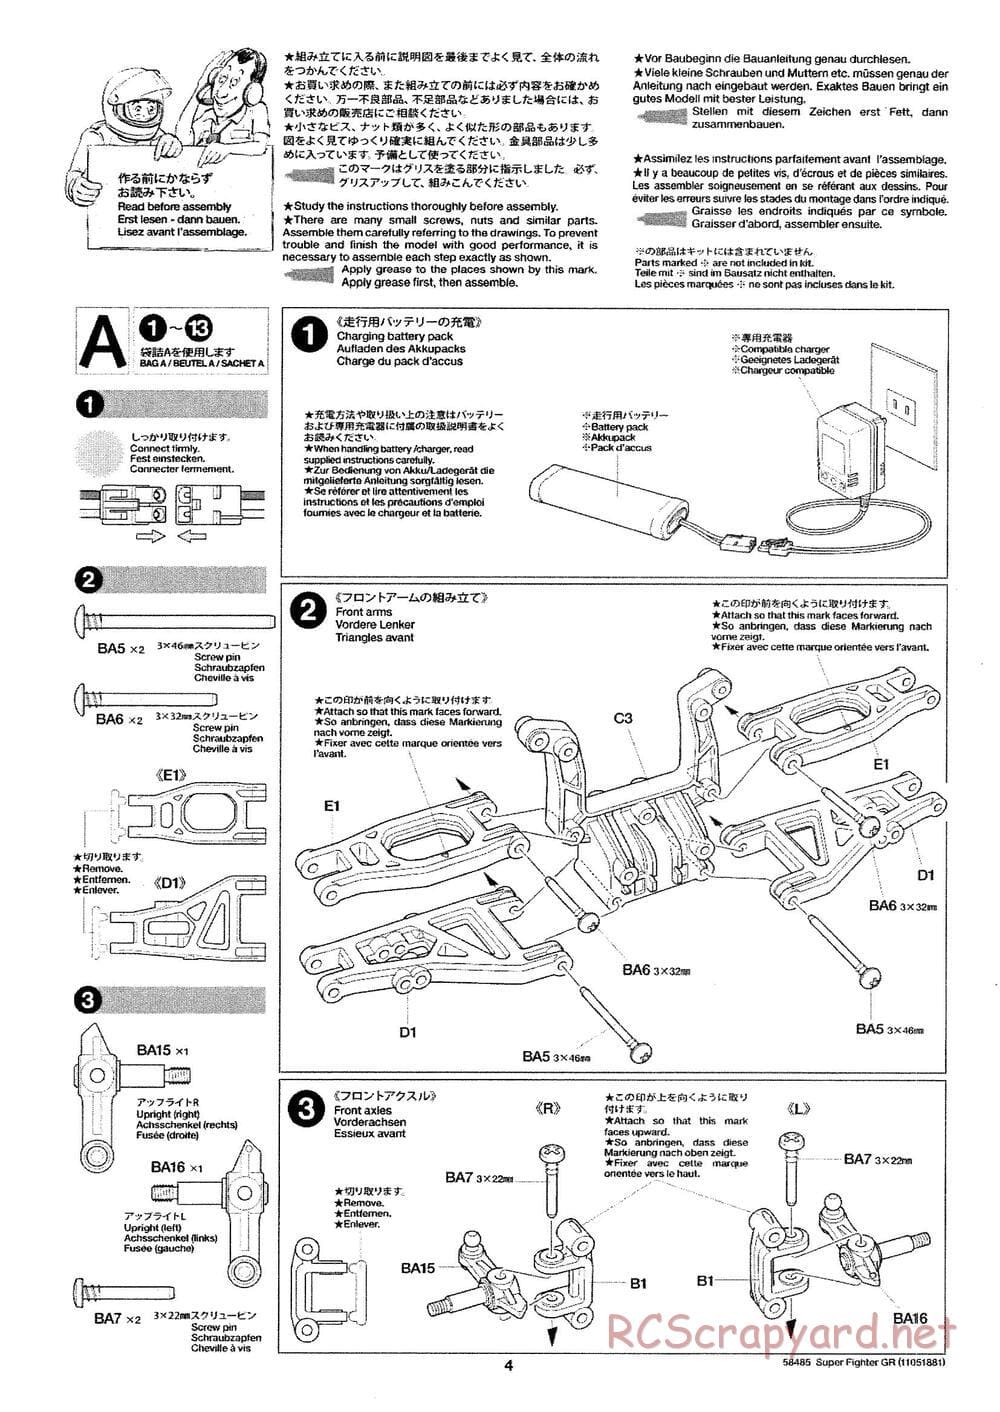 Tamiya - Super Fighter GR - DT-02 Chassis - Manual - Page 4